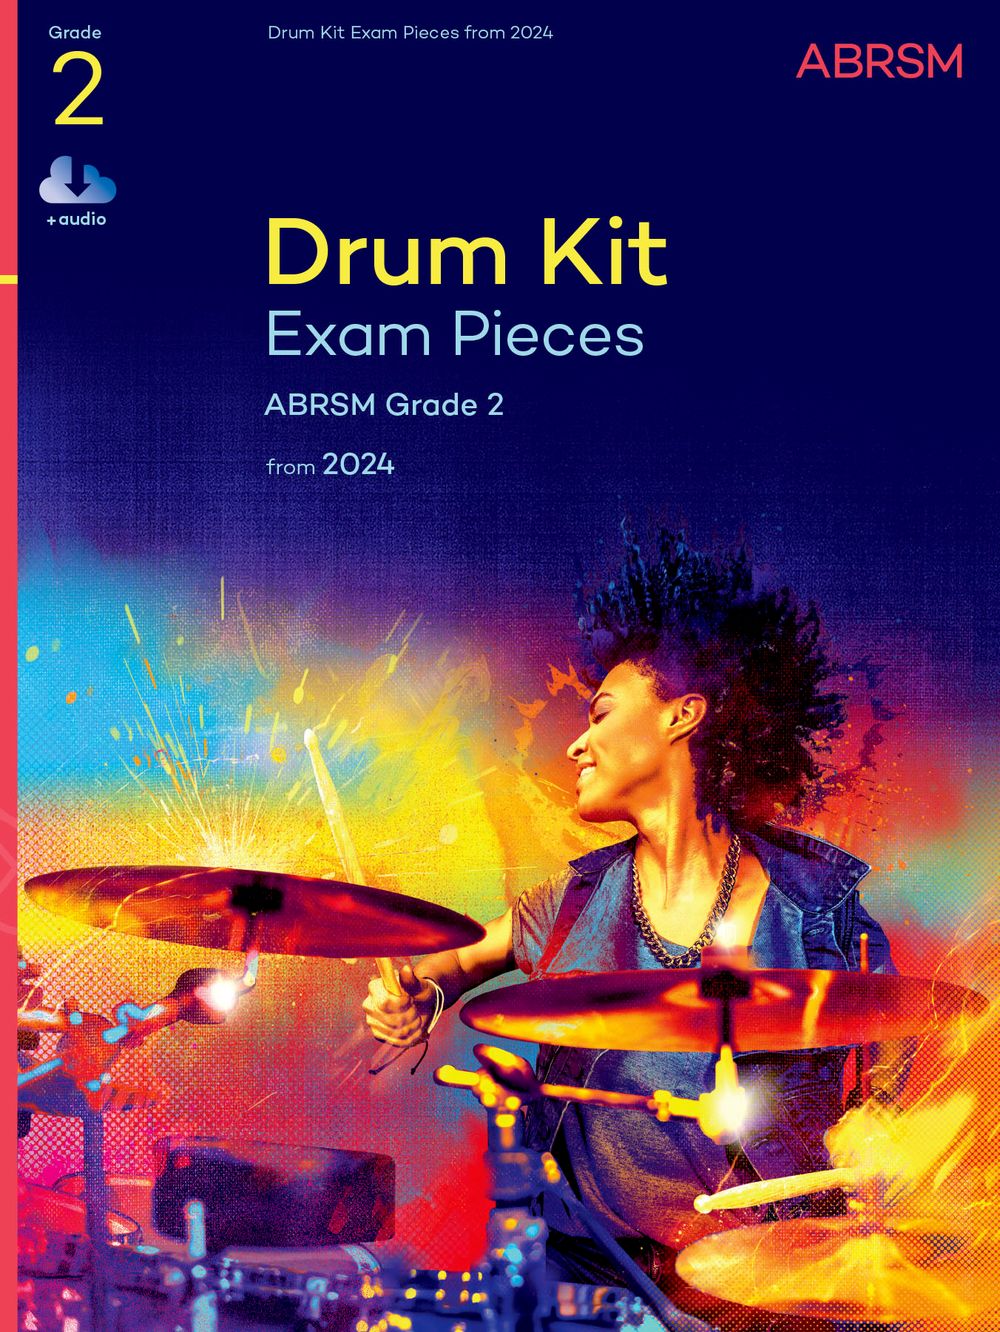 Drum Kit Exam Pieces From 2024 Grade 2 Abrsm Sheet Music Songbook